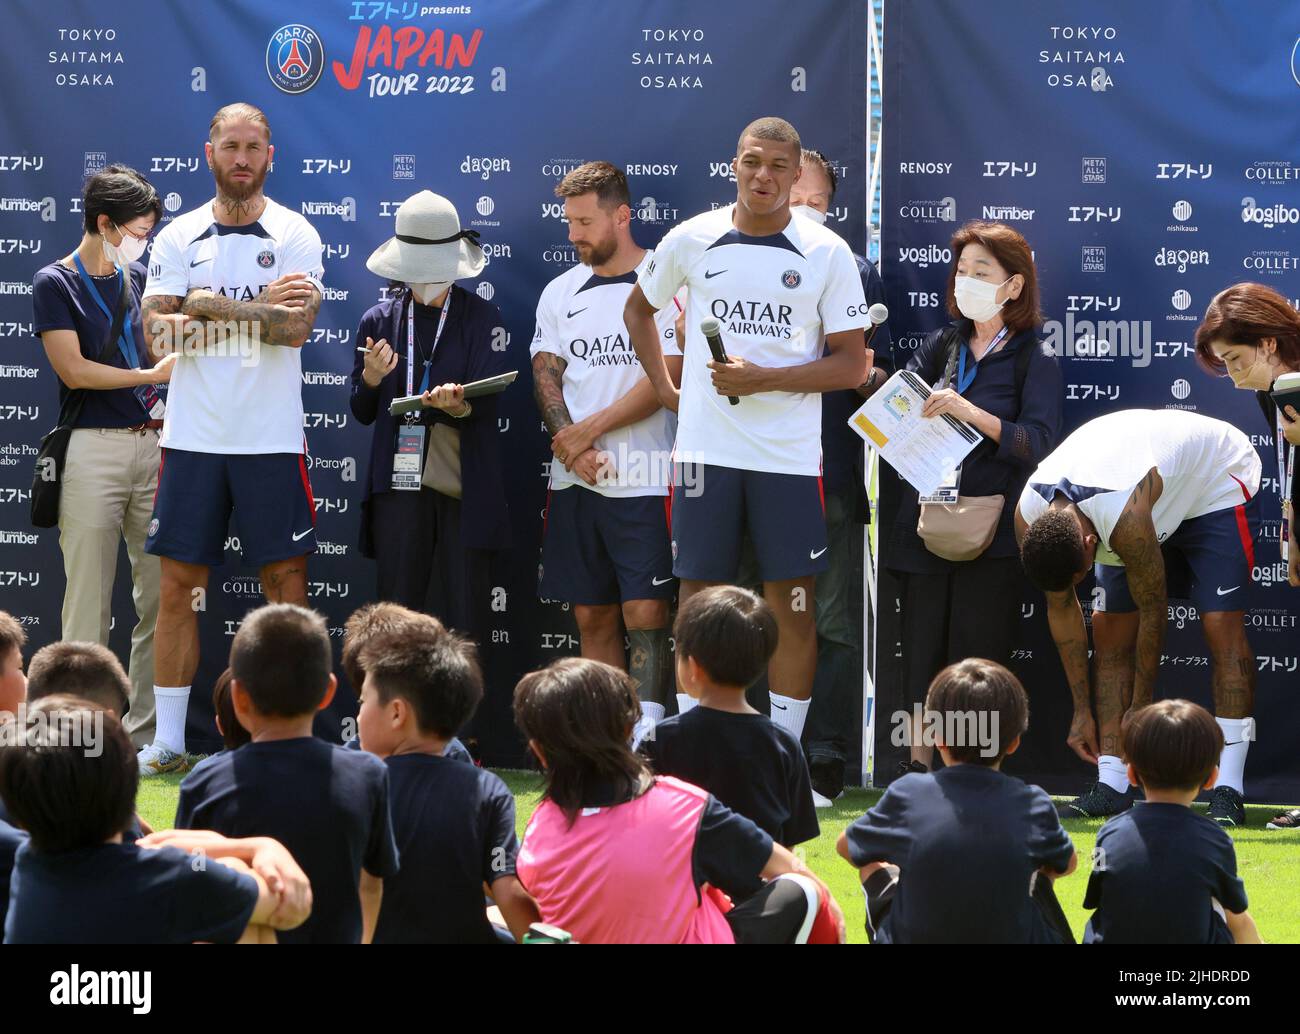 Tokyo, Japan. 18th July, 2022. (L-R) French football club team Paris Saint-Germain star players Sergio Ramos, Lionel Messi, Kylian Mbappe and Neymar Jr answer questions after they give a football clinic for children at the Prince Chichibu Rugby Field in Tokyo on Monday, July 18, 2022. Paris Saint-Germain will have games with Japanese club teams Kawasaki Frontale, Urawa Reds and Gamba Osaka for their Japan tour. Credit: Yoshio Tsunoda/AFLO/Alamy Live News Stock Photo